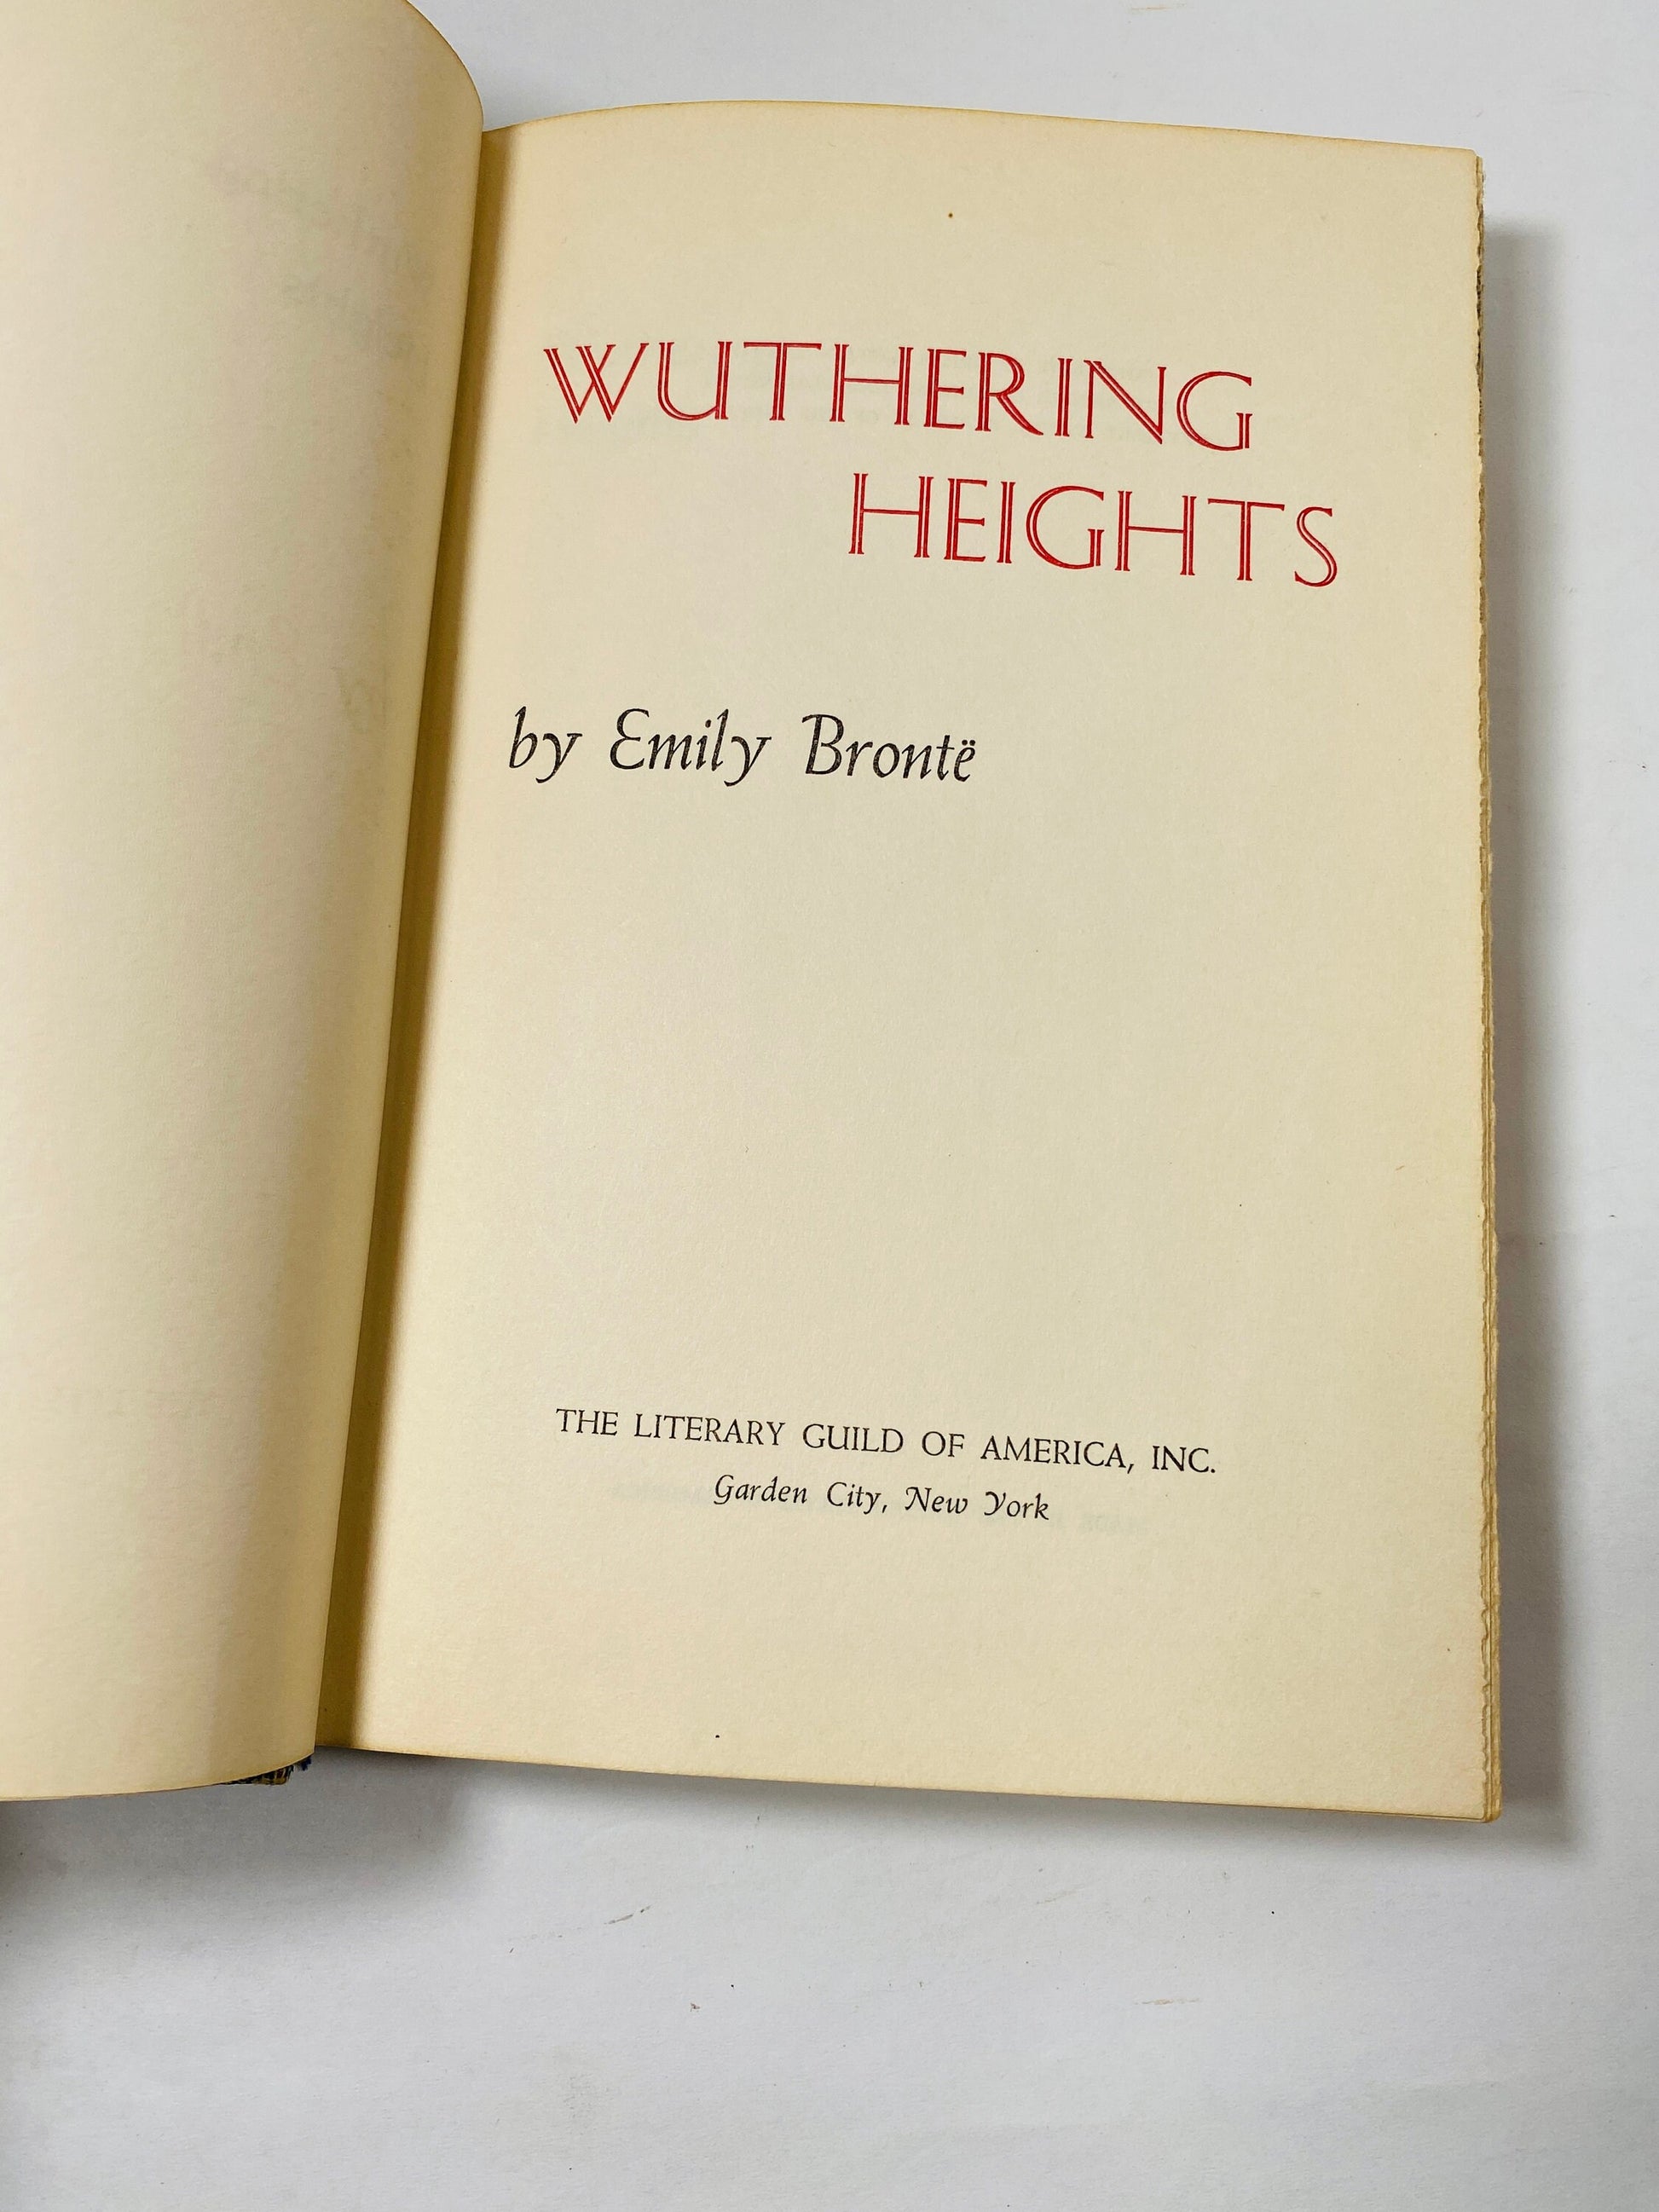 Wuthering Heights by Emily Bronte Beautiful vintage book Literary Guild edition circa 1947 Fantastic love story and gift. Embossed